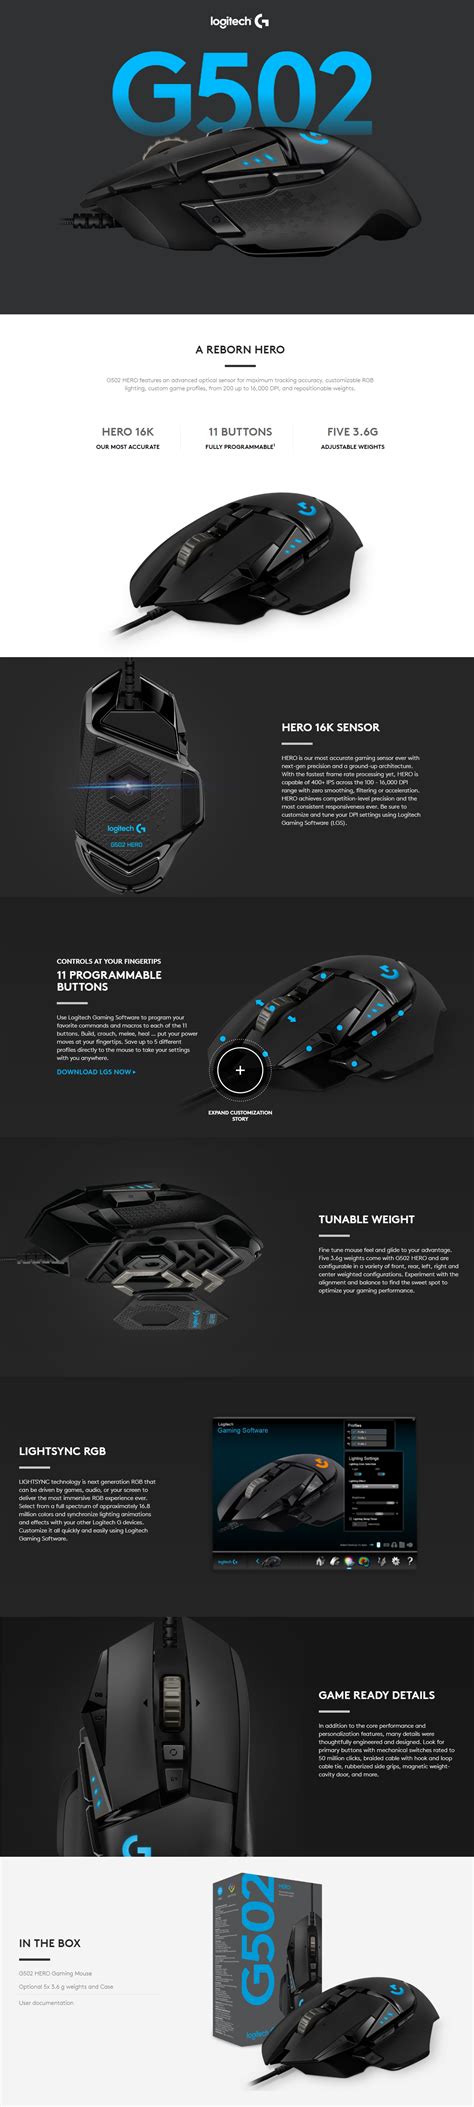 Logitech g502 software and driver update for windows 10. Logitech G502 Driver - Logitech G502 Lightspeed Wireless Gaming Mouse : In addition to providing ...